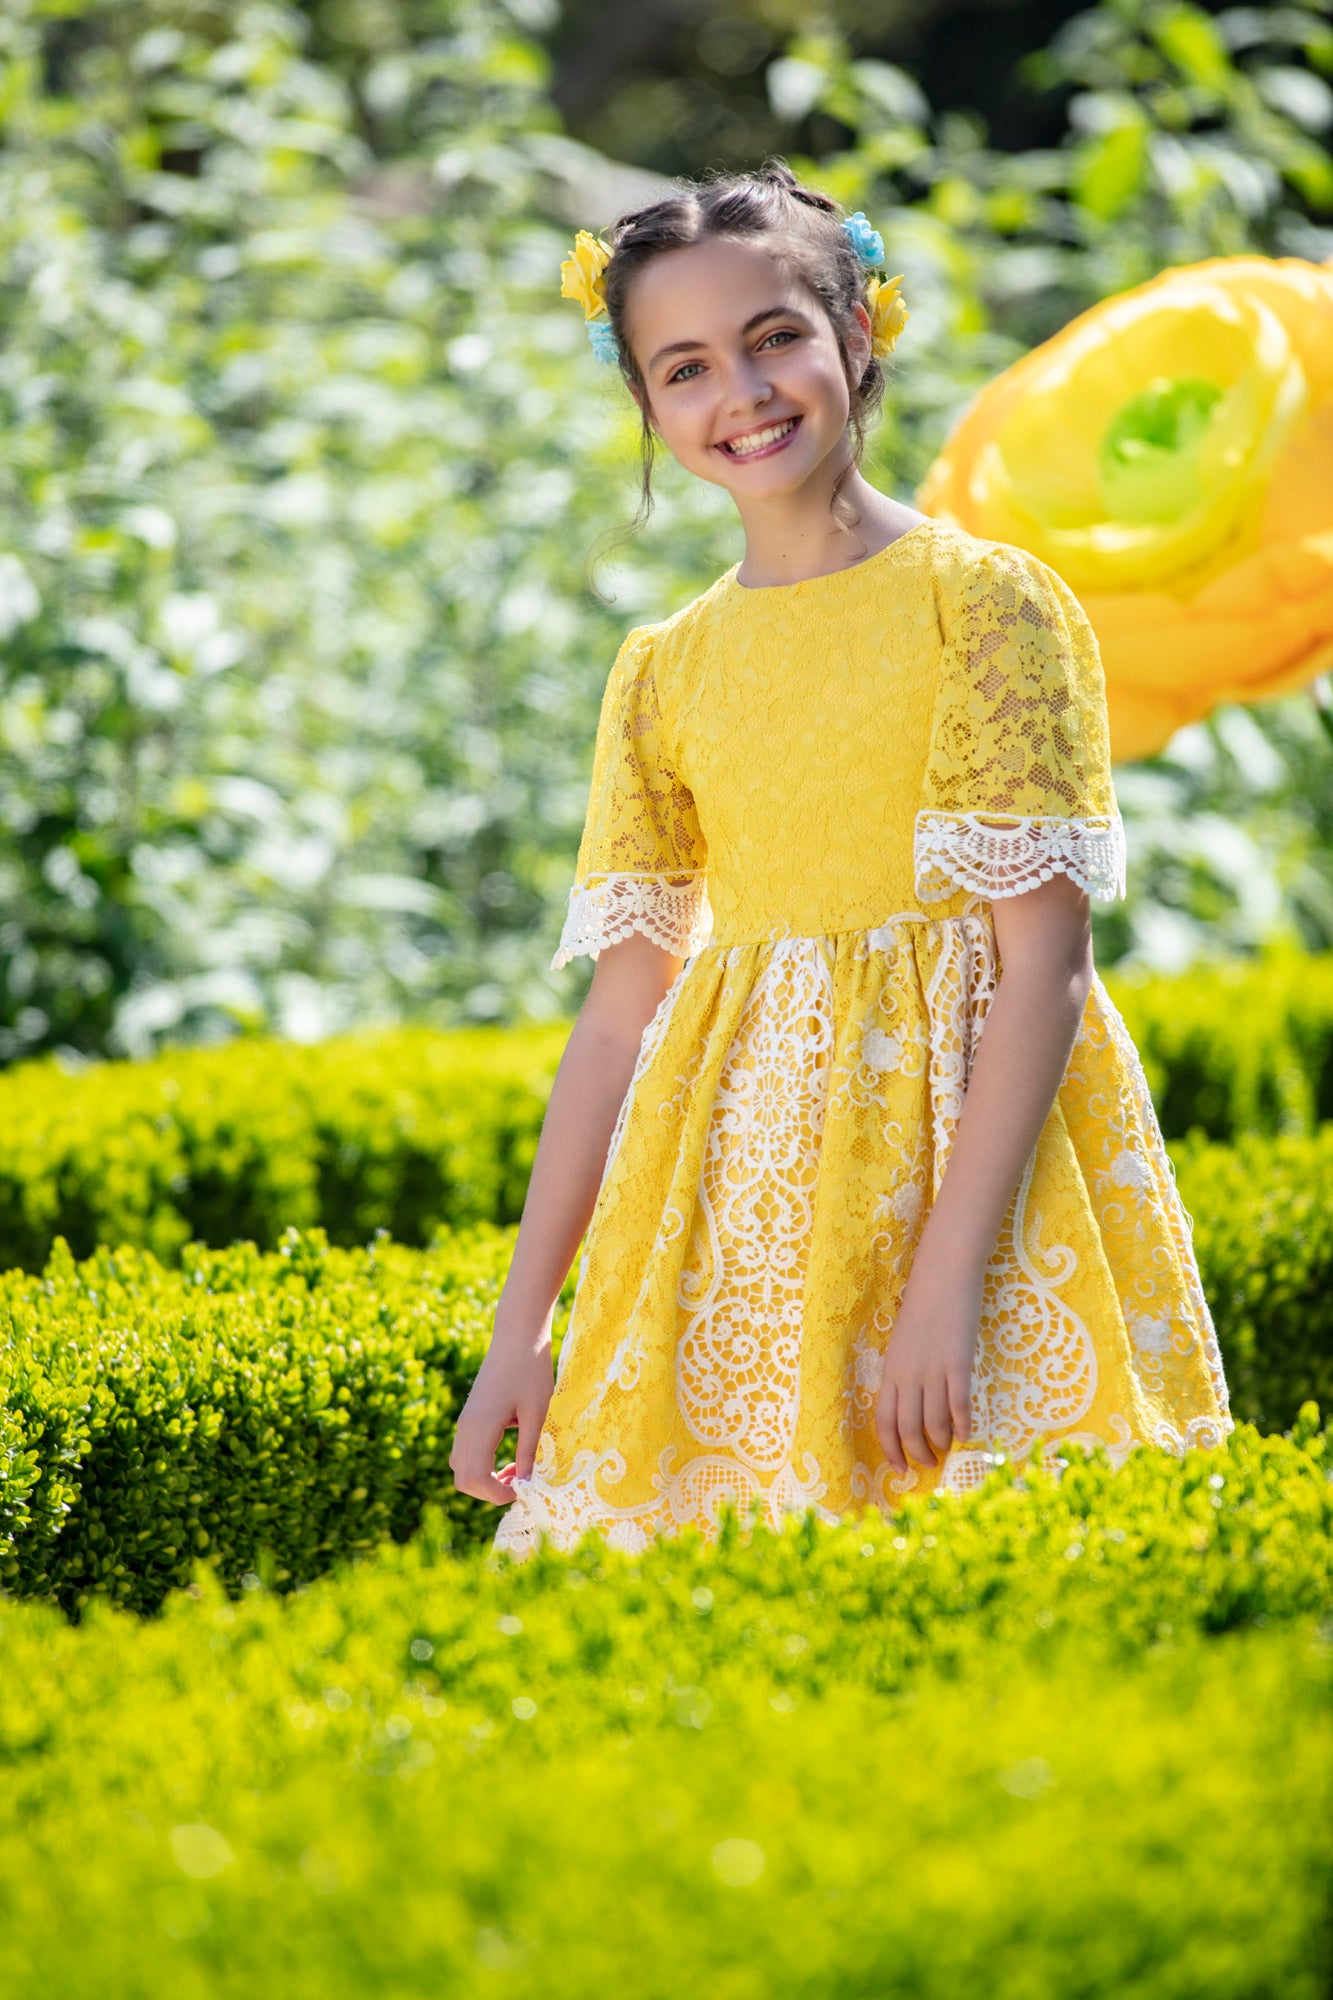 Lace and Yellow Party Dress